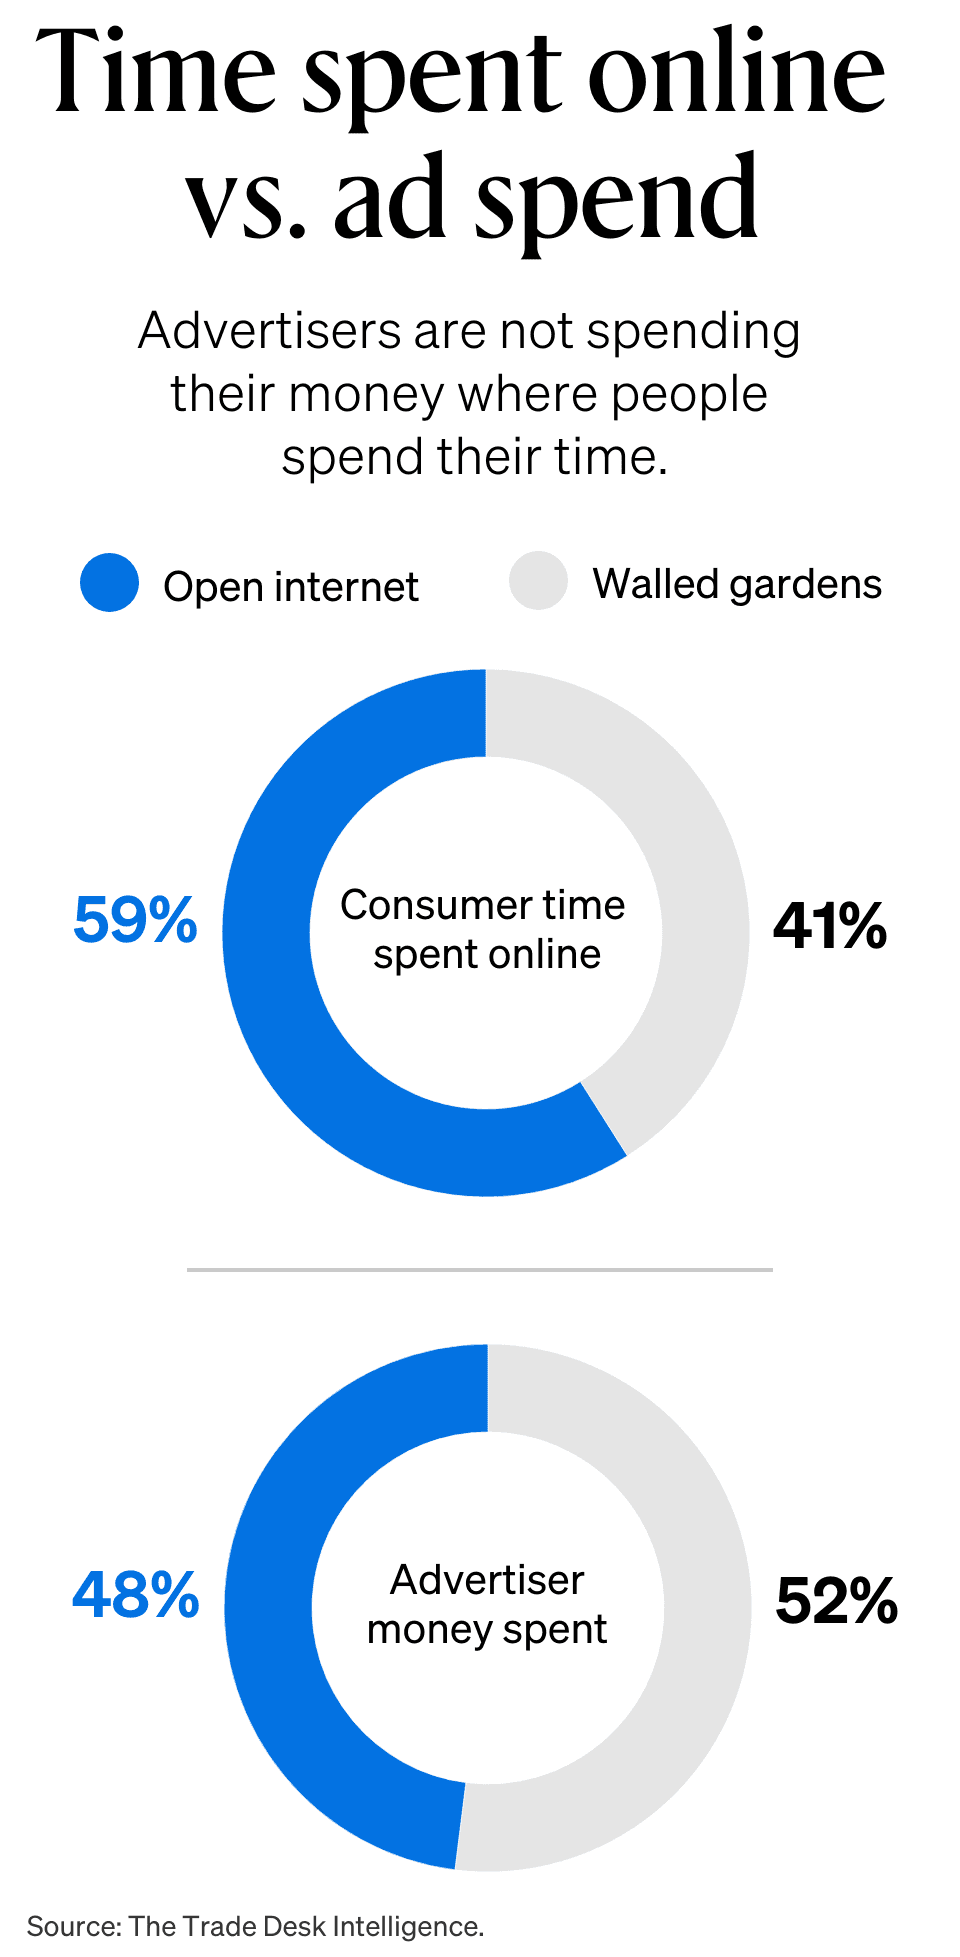 Graph comparing consumer time spent online and on the open internet vs. ad spend on walled gardens and the open internet..